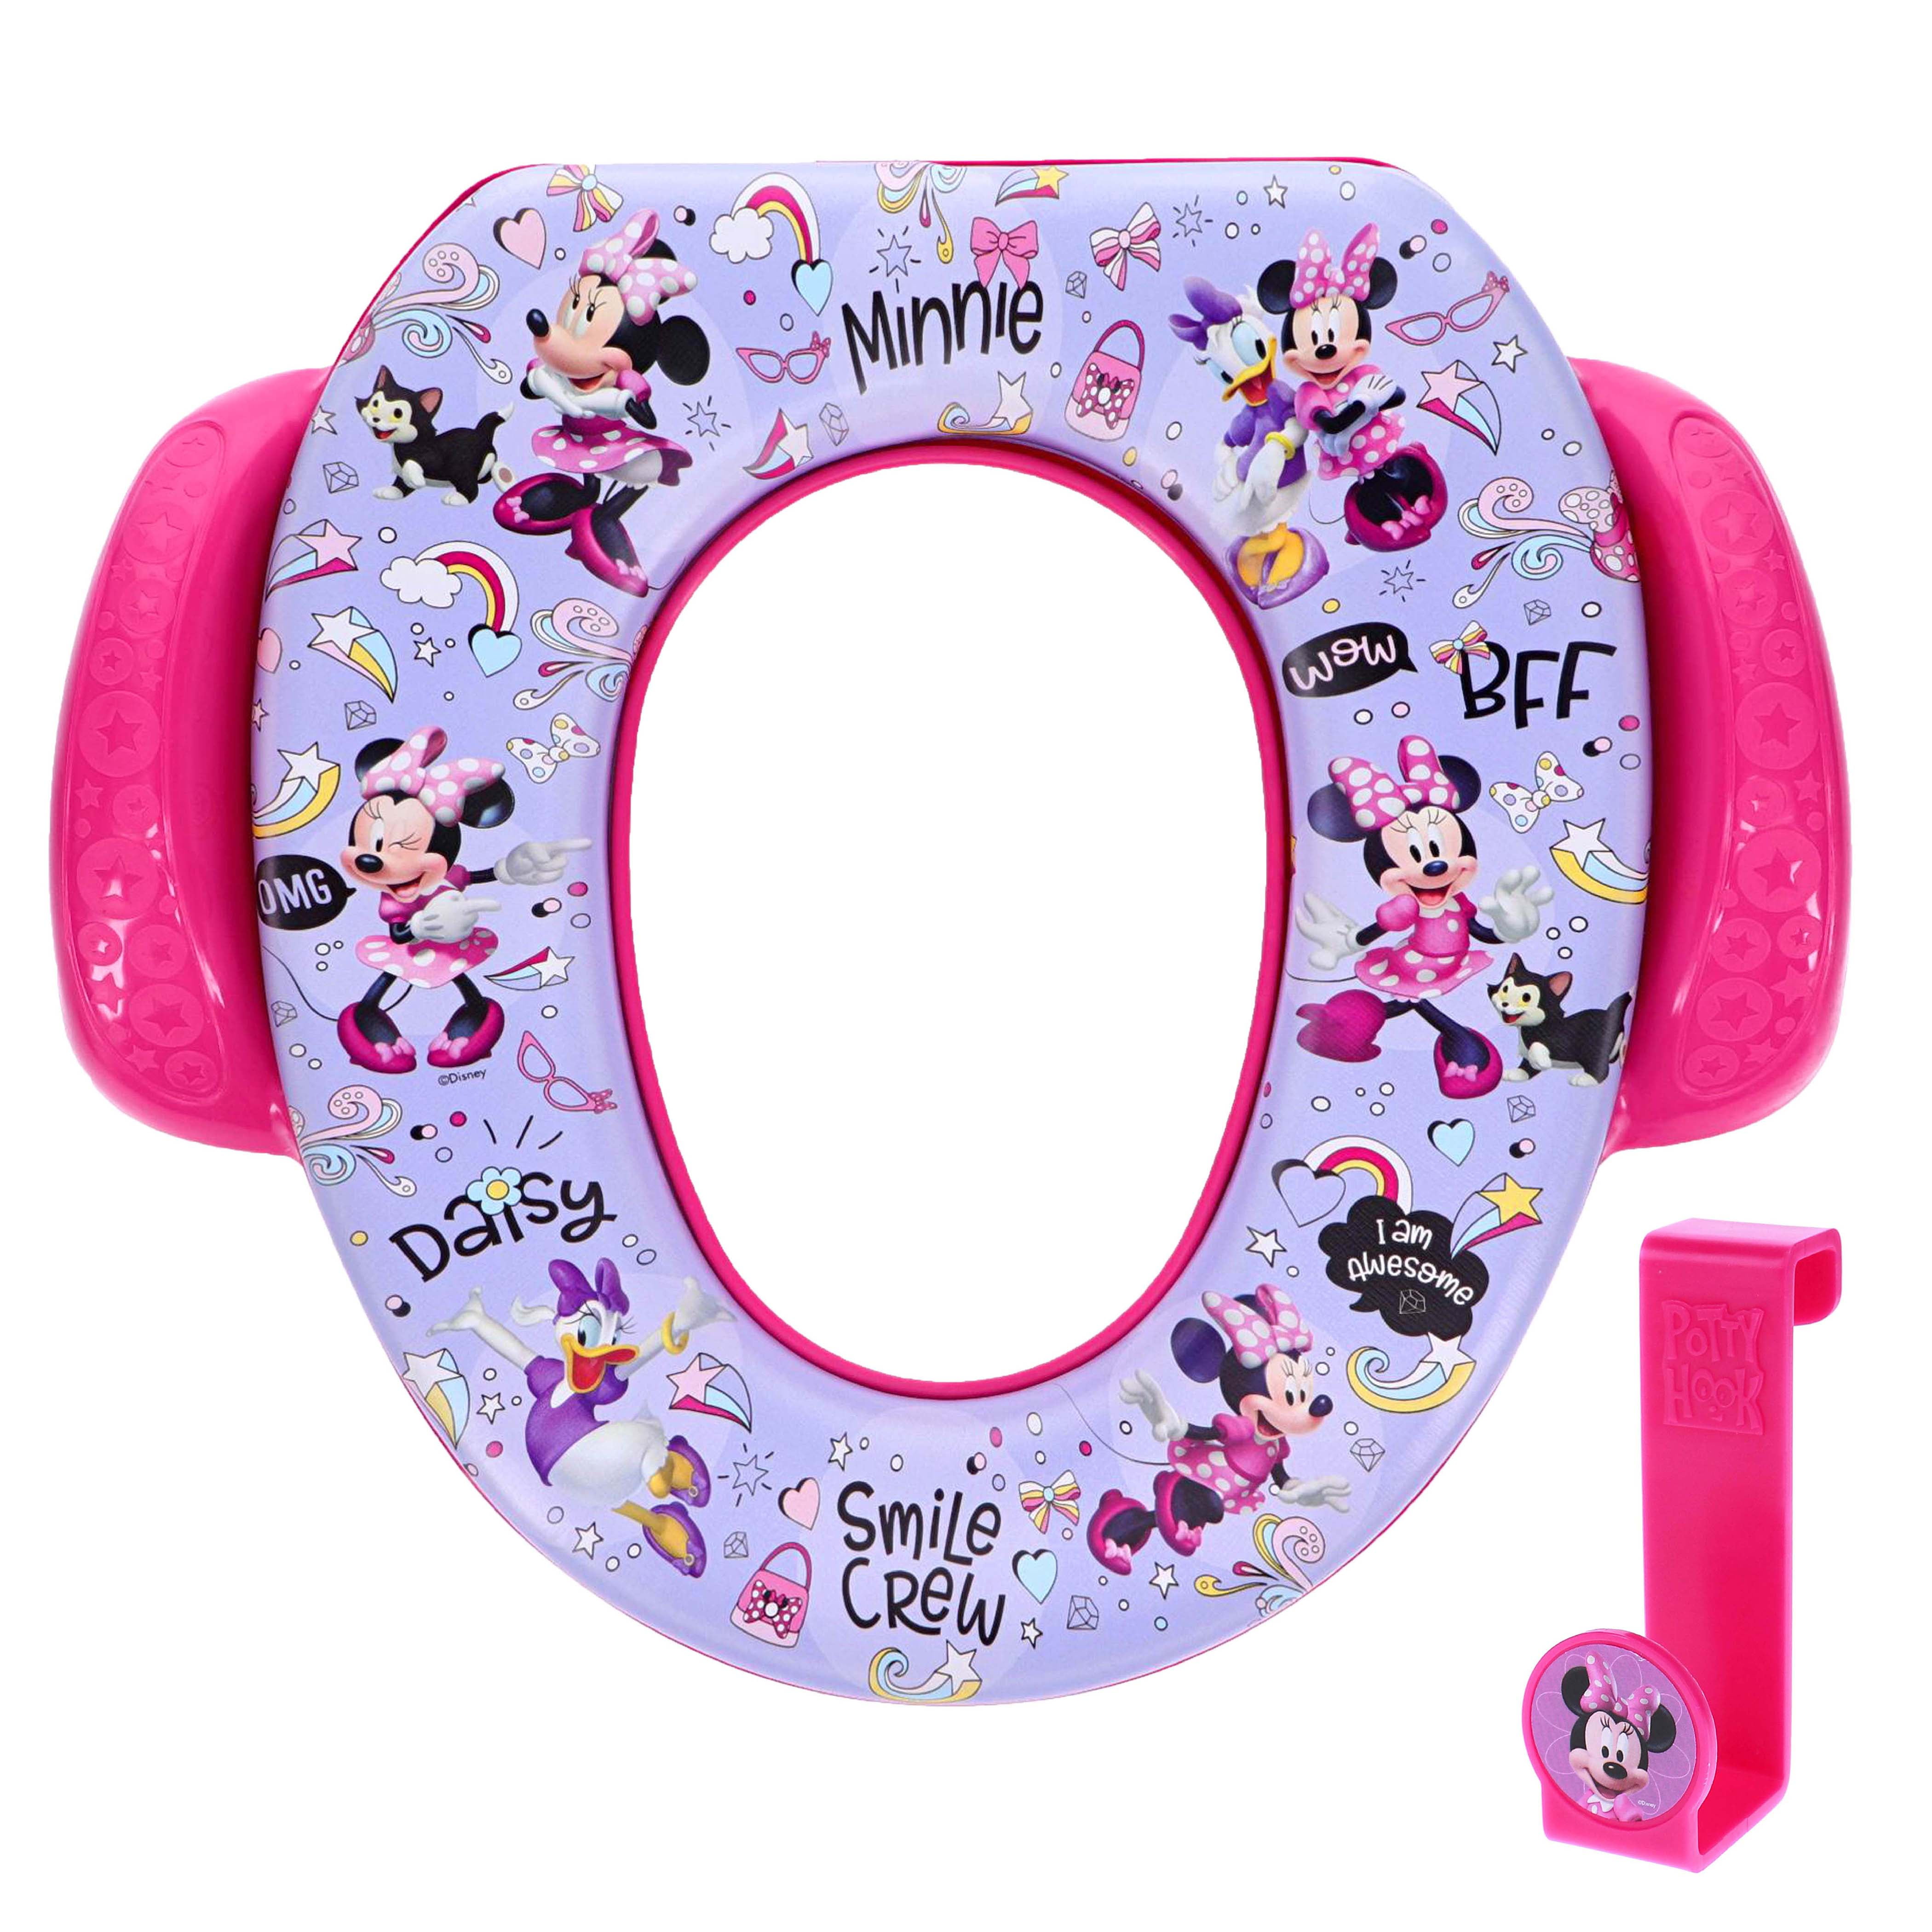 3-in-1 Potty Training System Easy Clean Compact with Fun Sounds Minnie Mouse New 